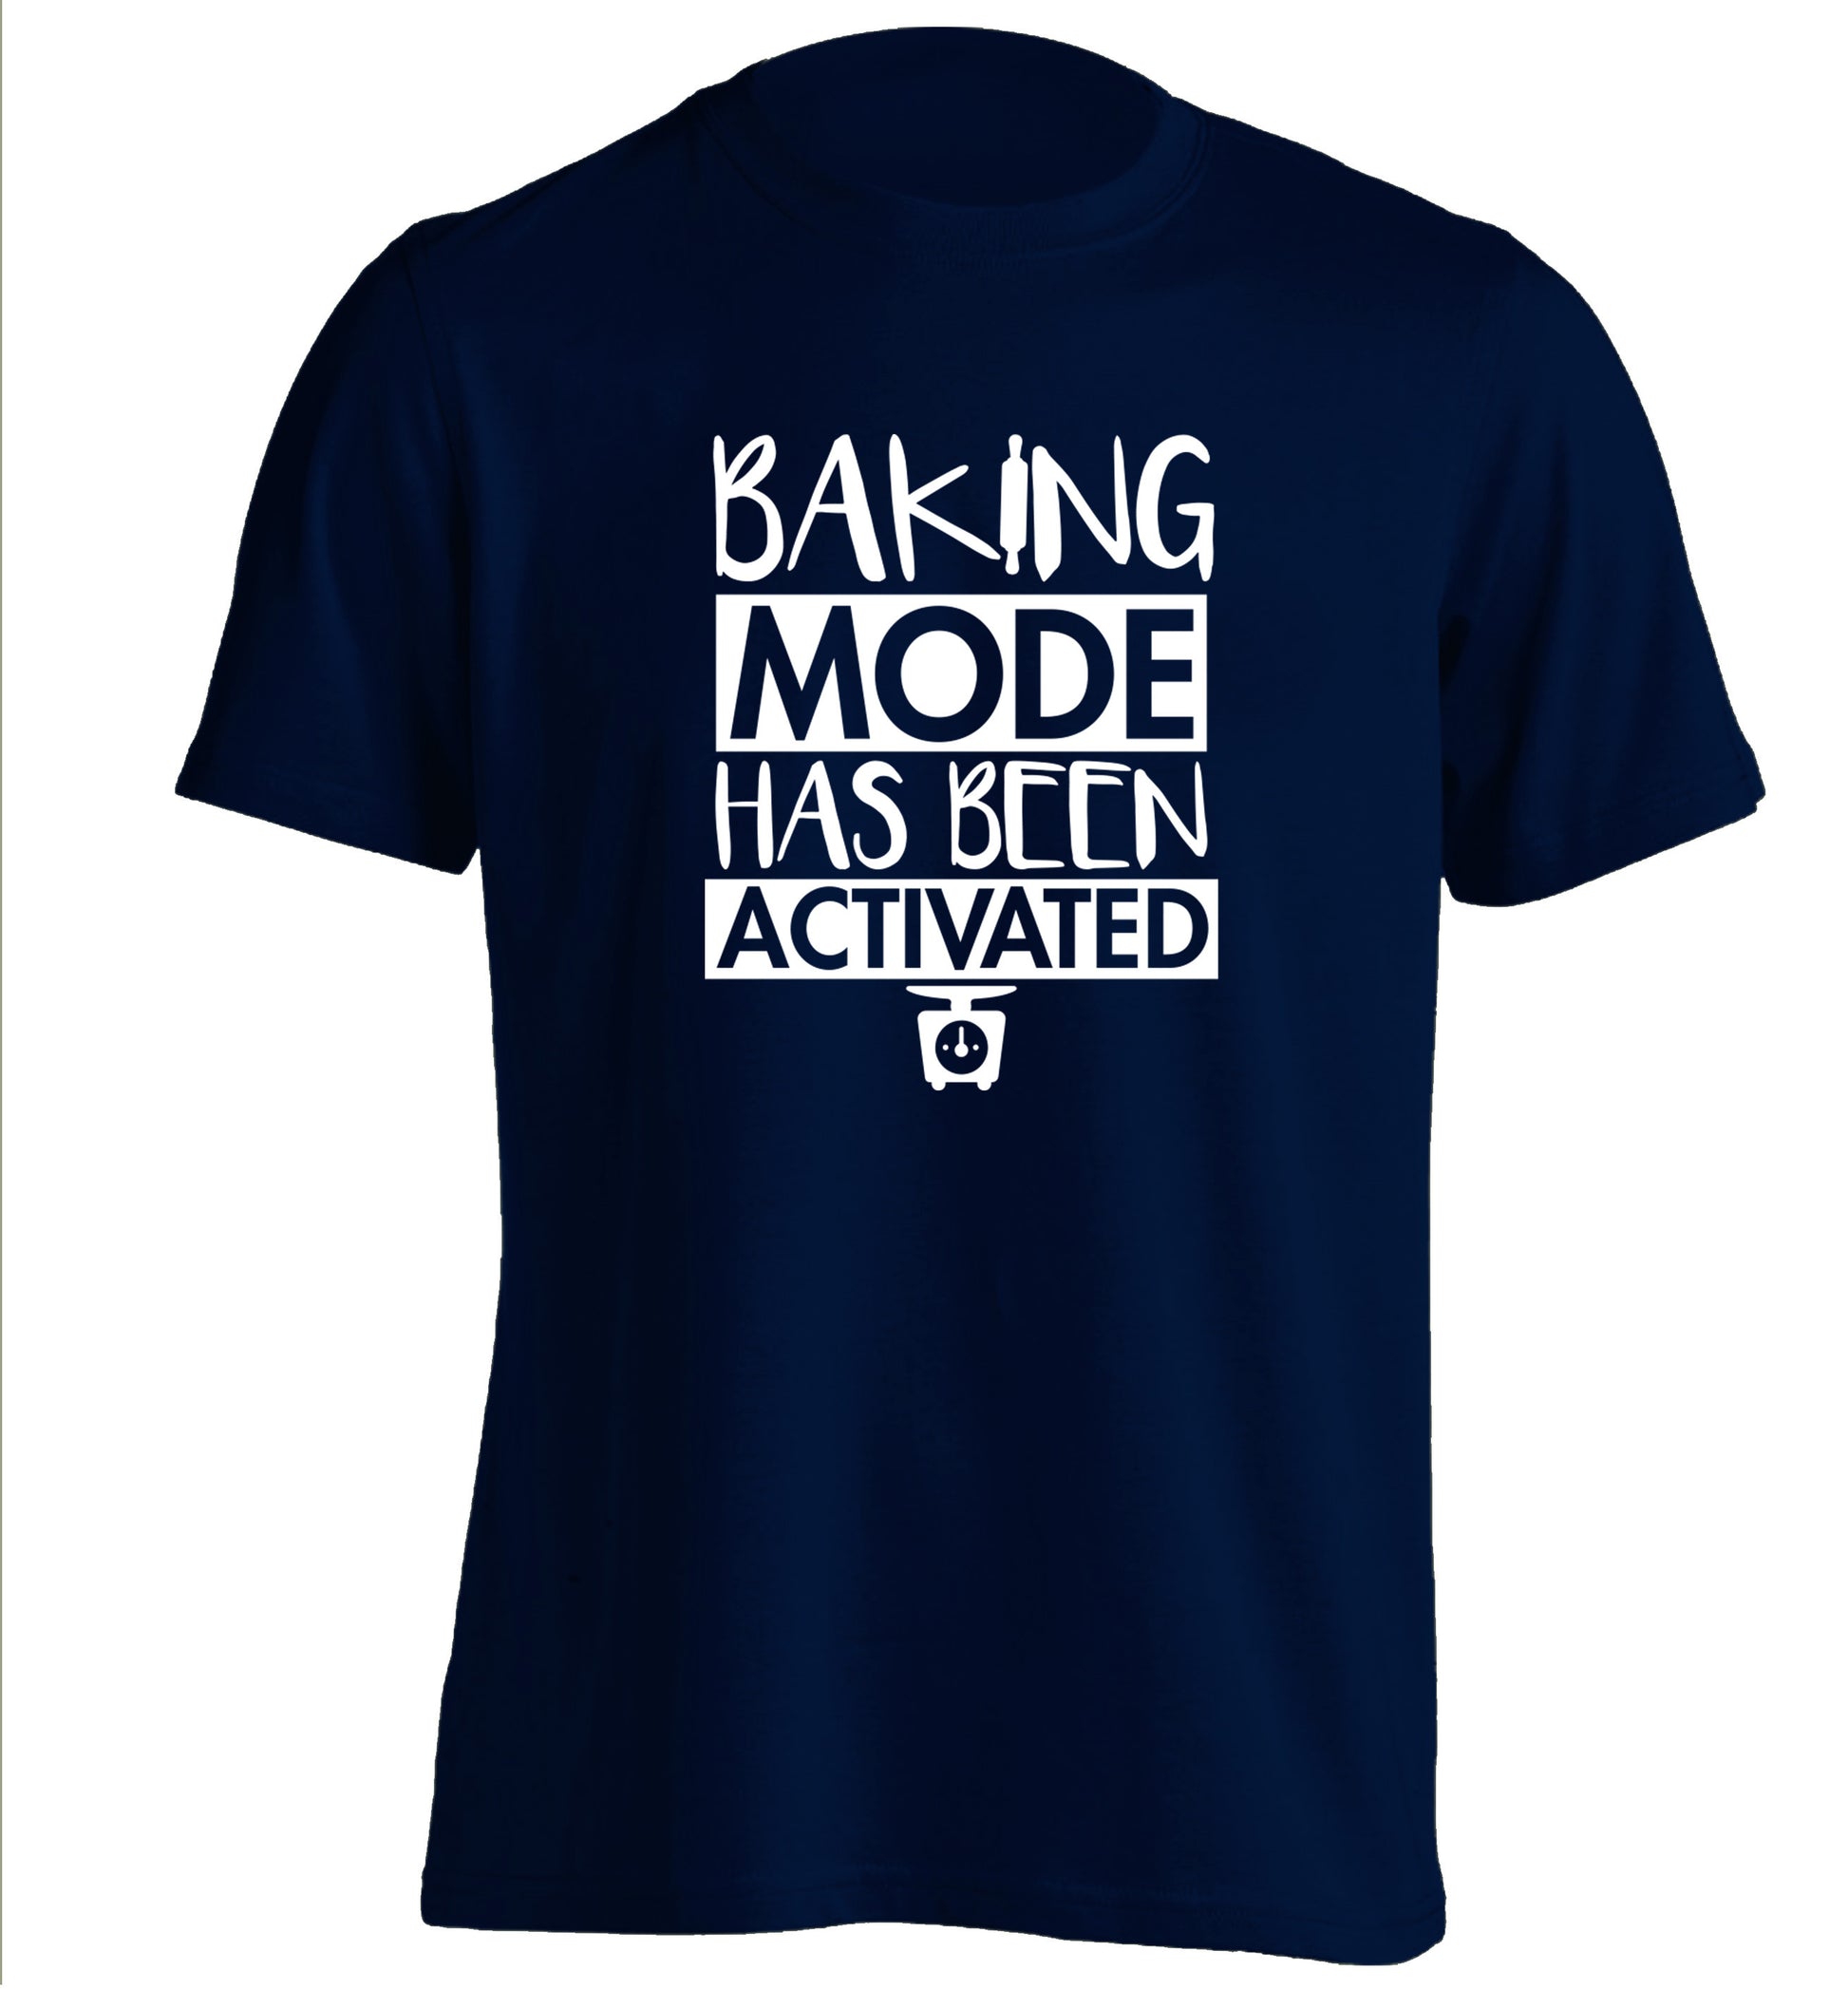 Baking mode has been activated adults unisex navy Tshirt 2XL